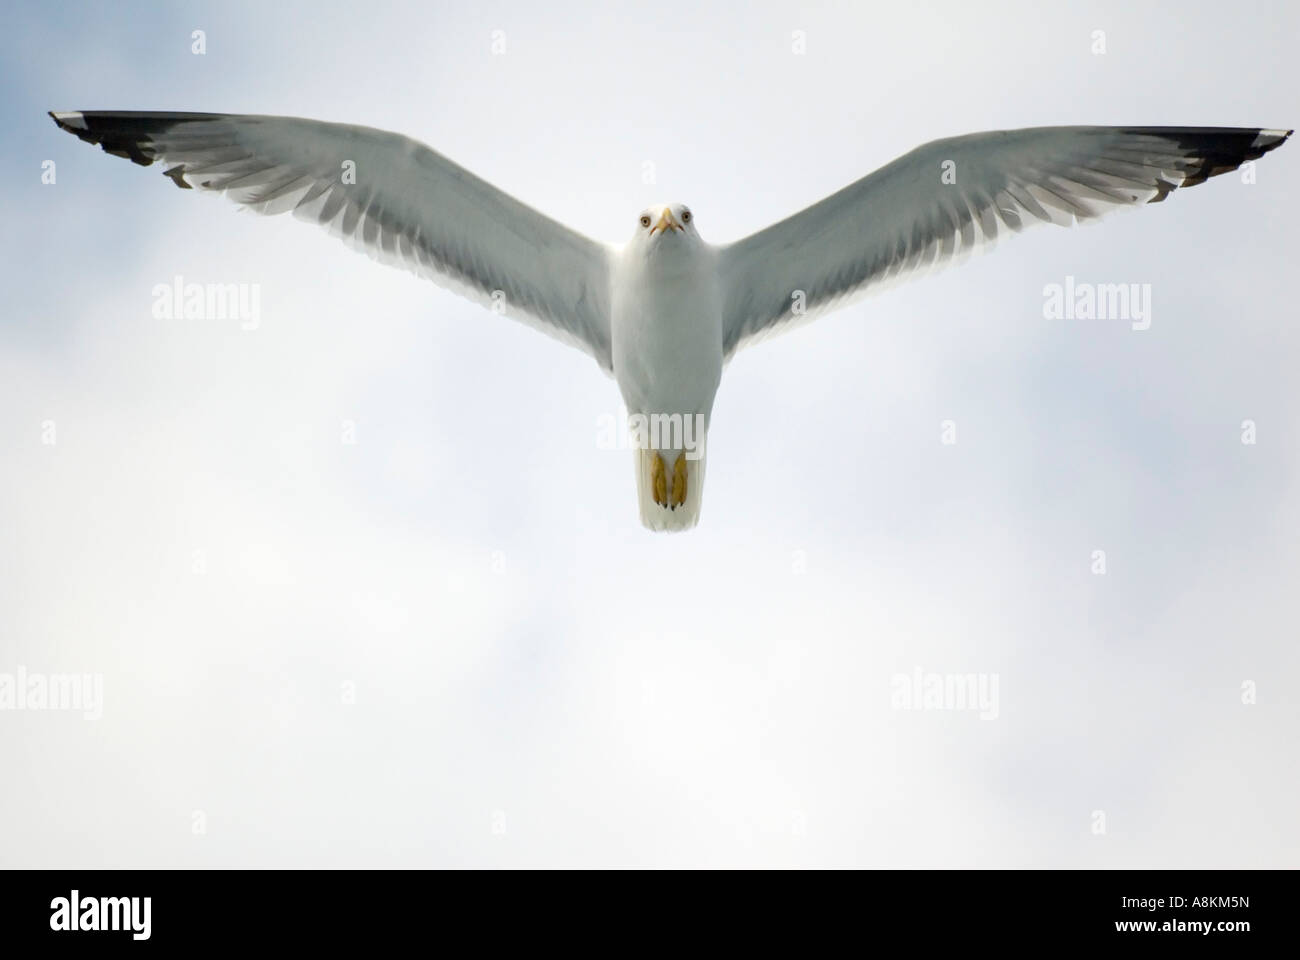 Flying sea gull from below Stock Photo